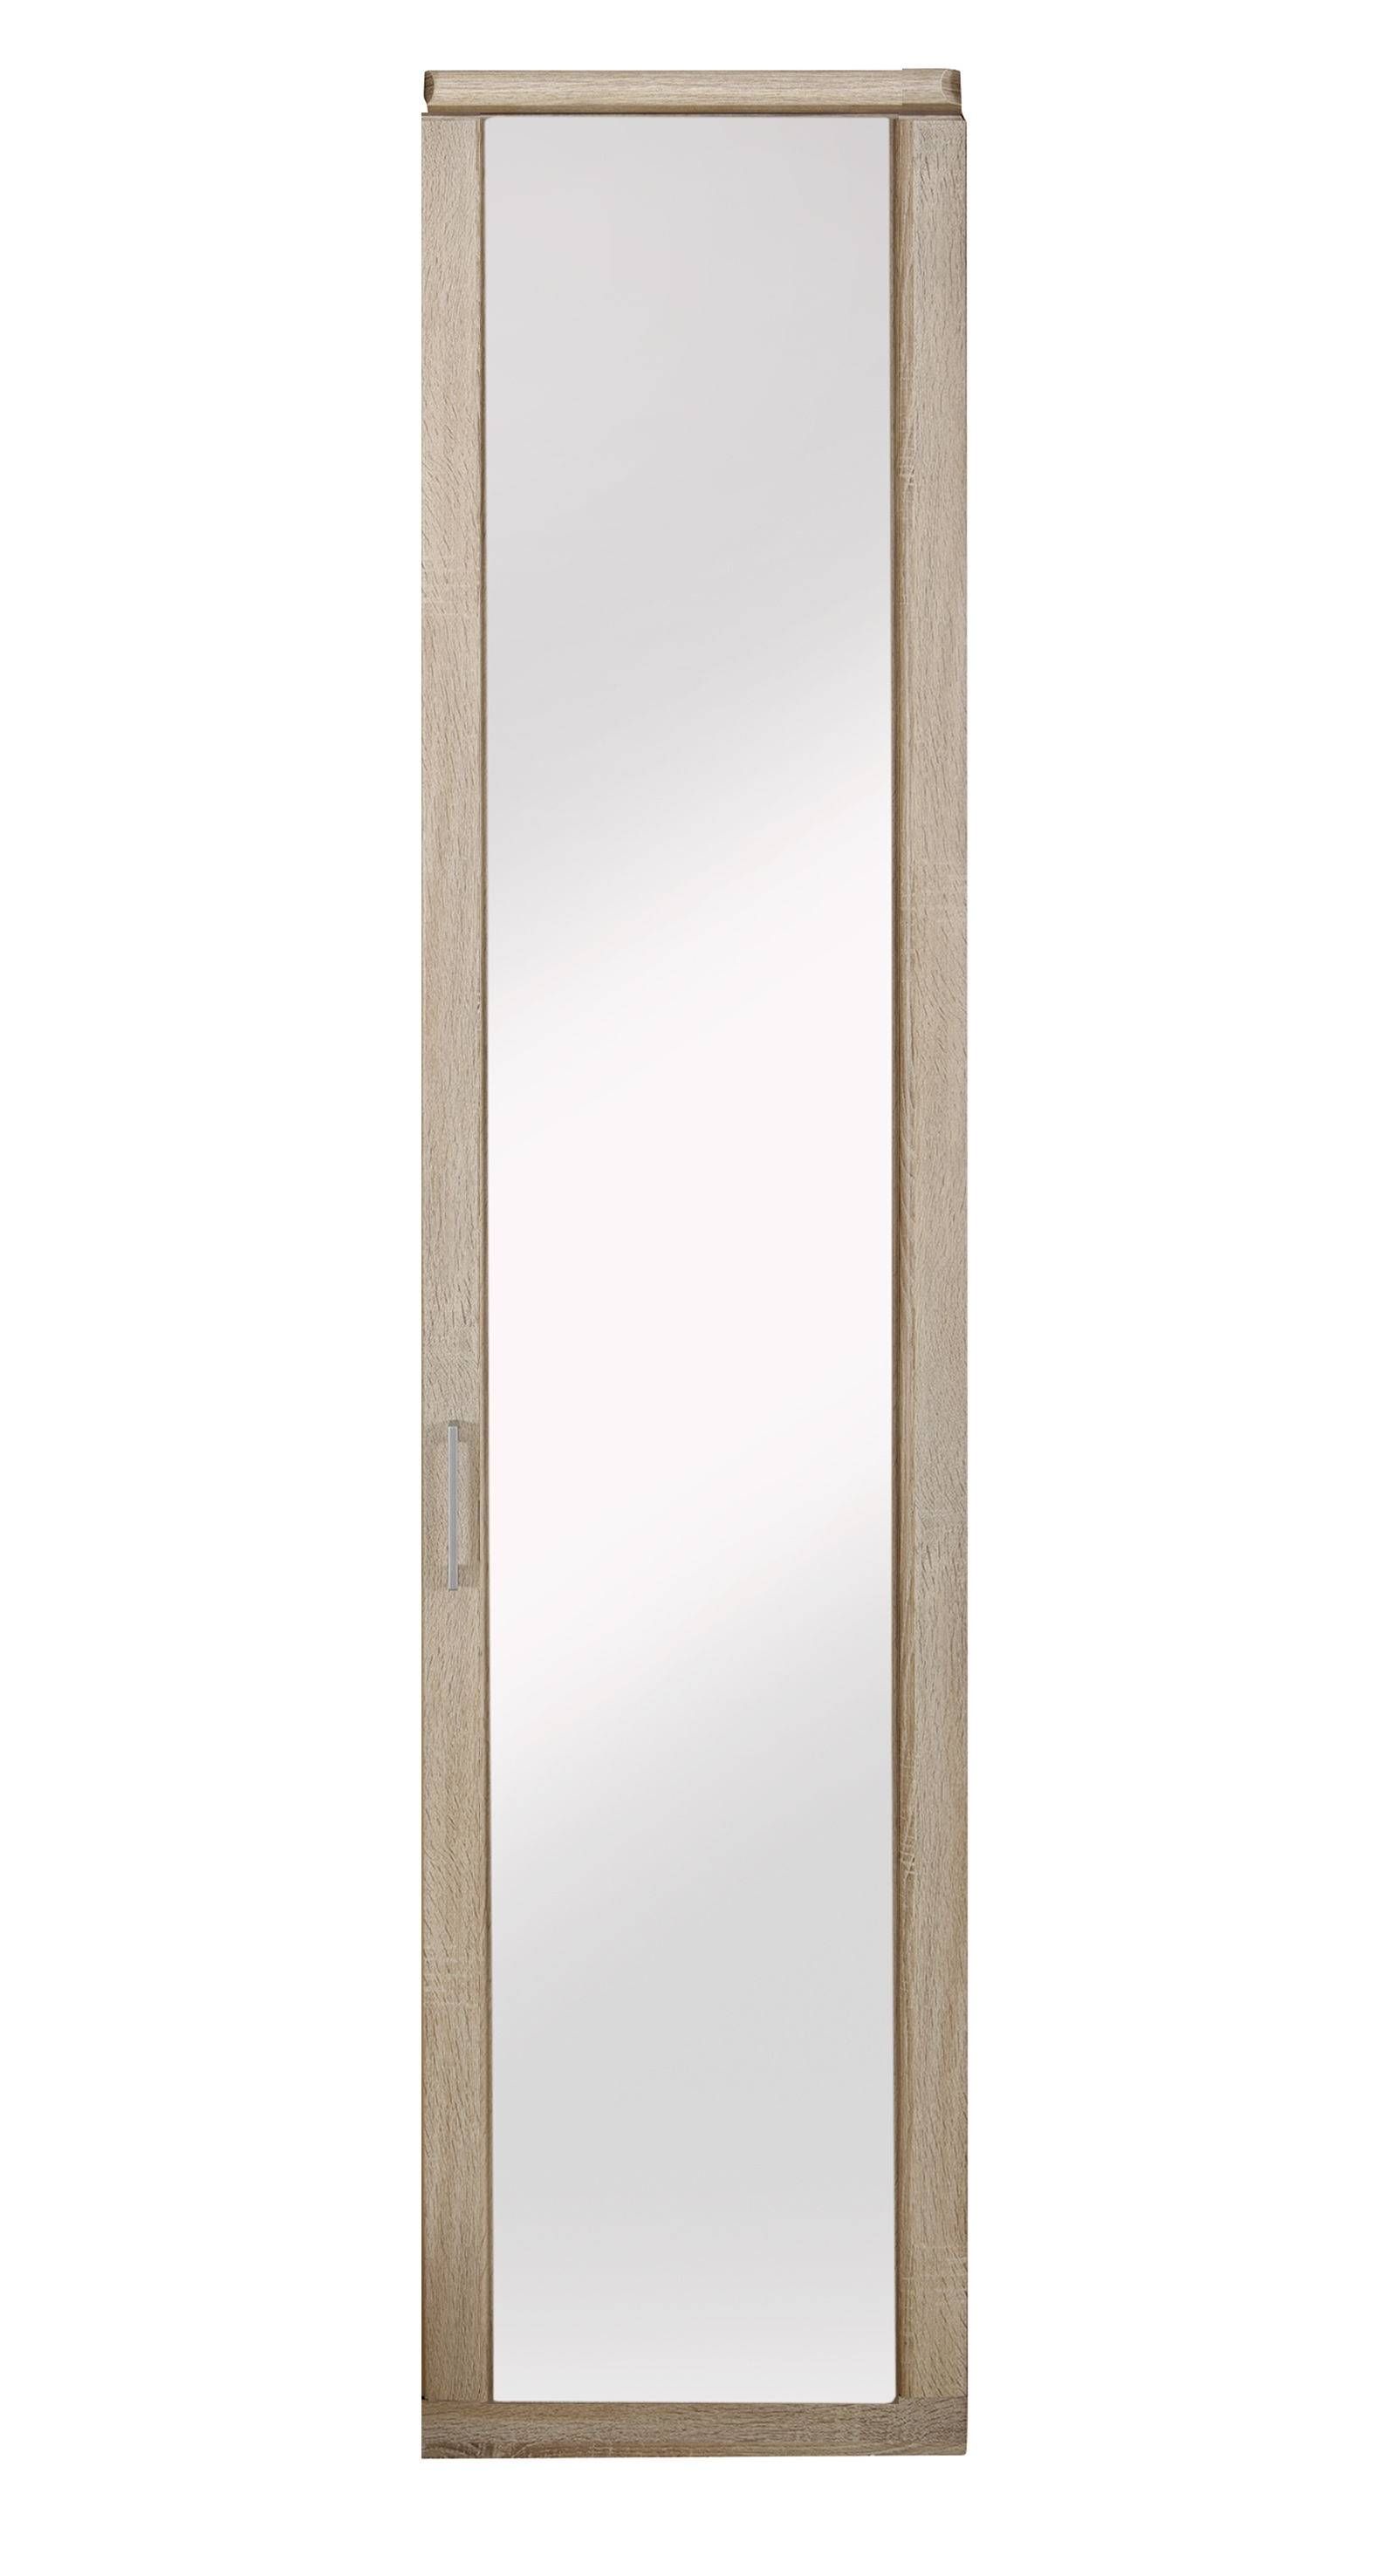 Fine One Door Mirrored Wardrobe 66 About Remodel Dazzle Wardrobe With One Door Wardrobes With Mirror (View 5 of 15)